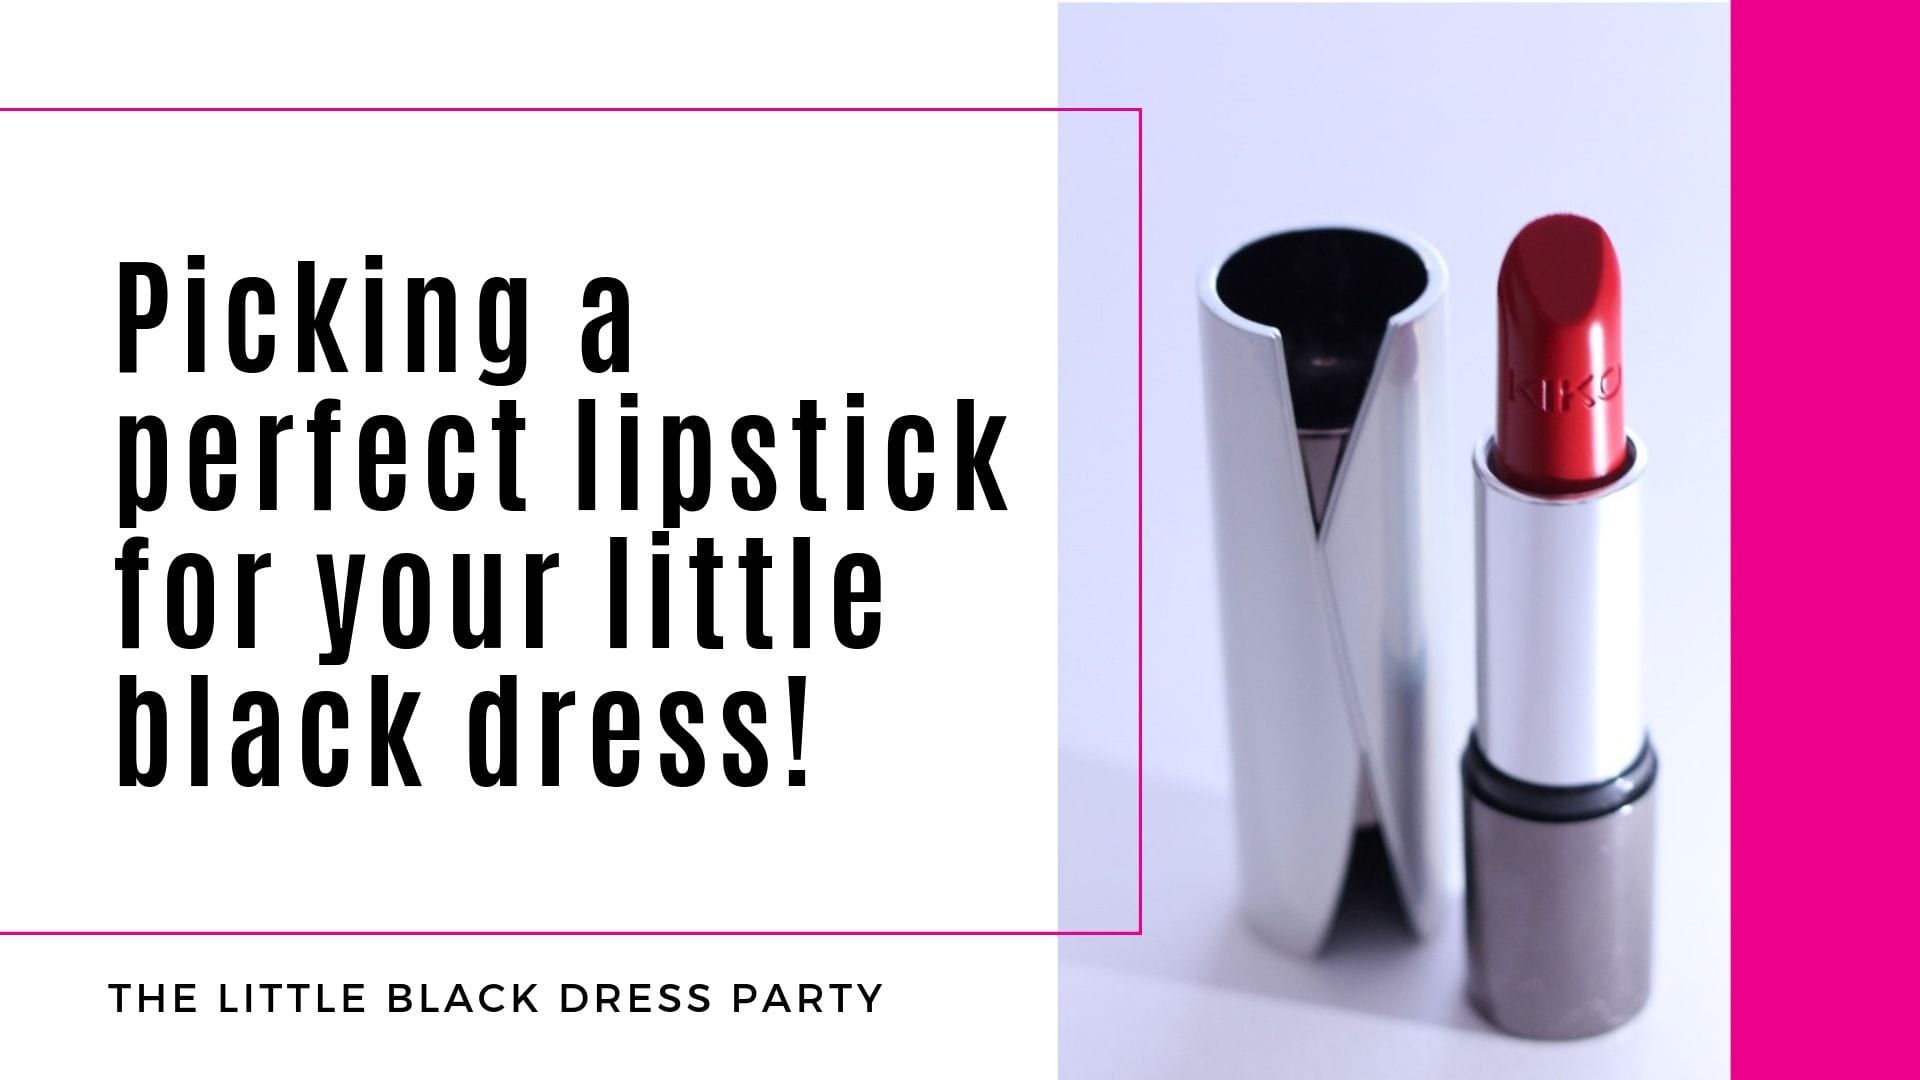 Picking a perfect lipstick for your little black dress!